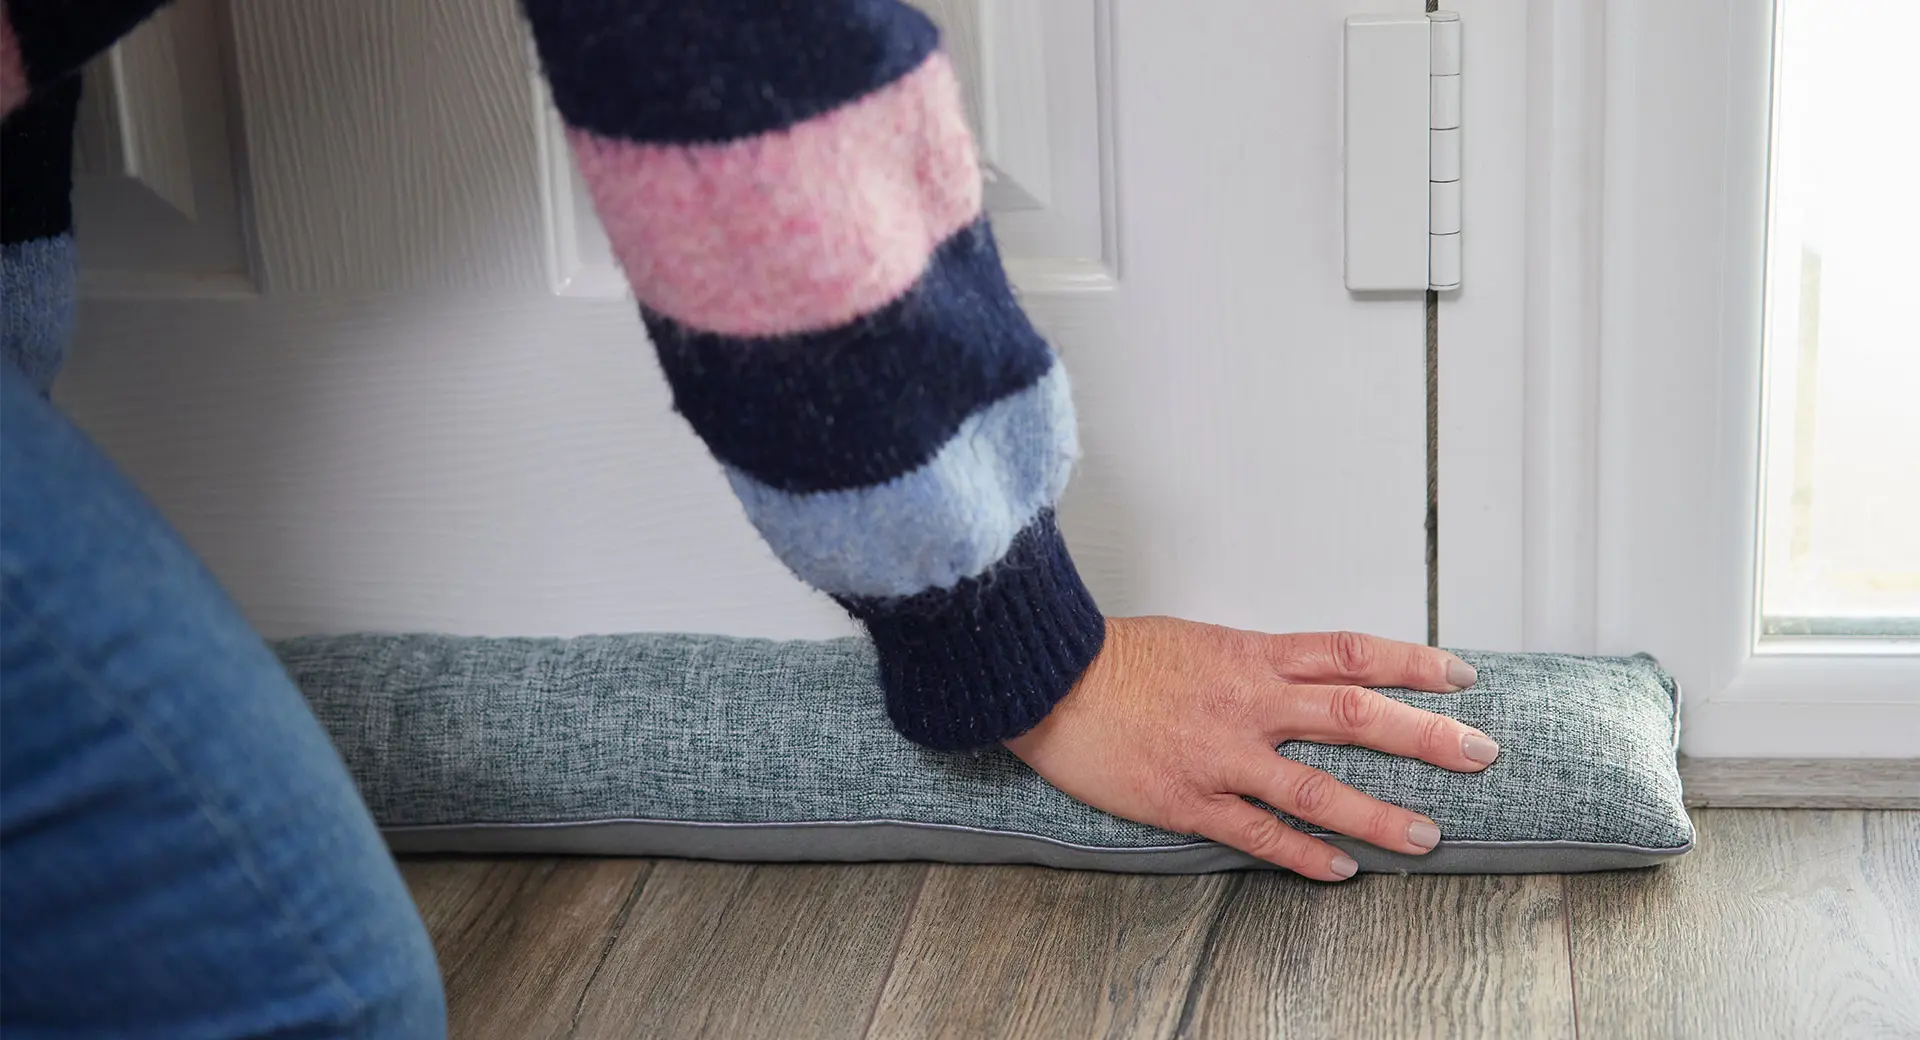 A person placing a draft excluder at the bottom of a door